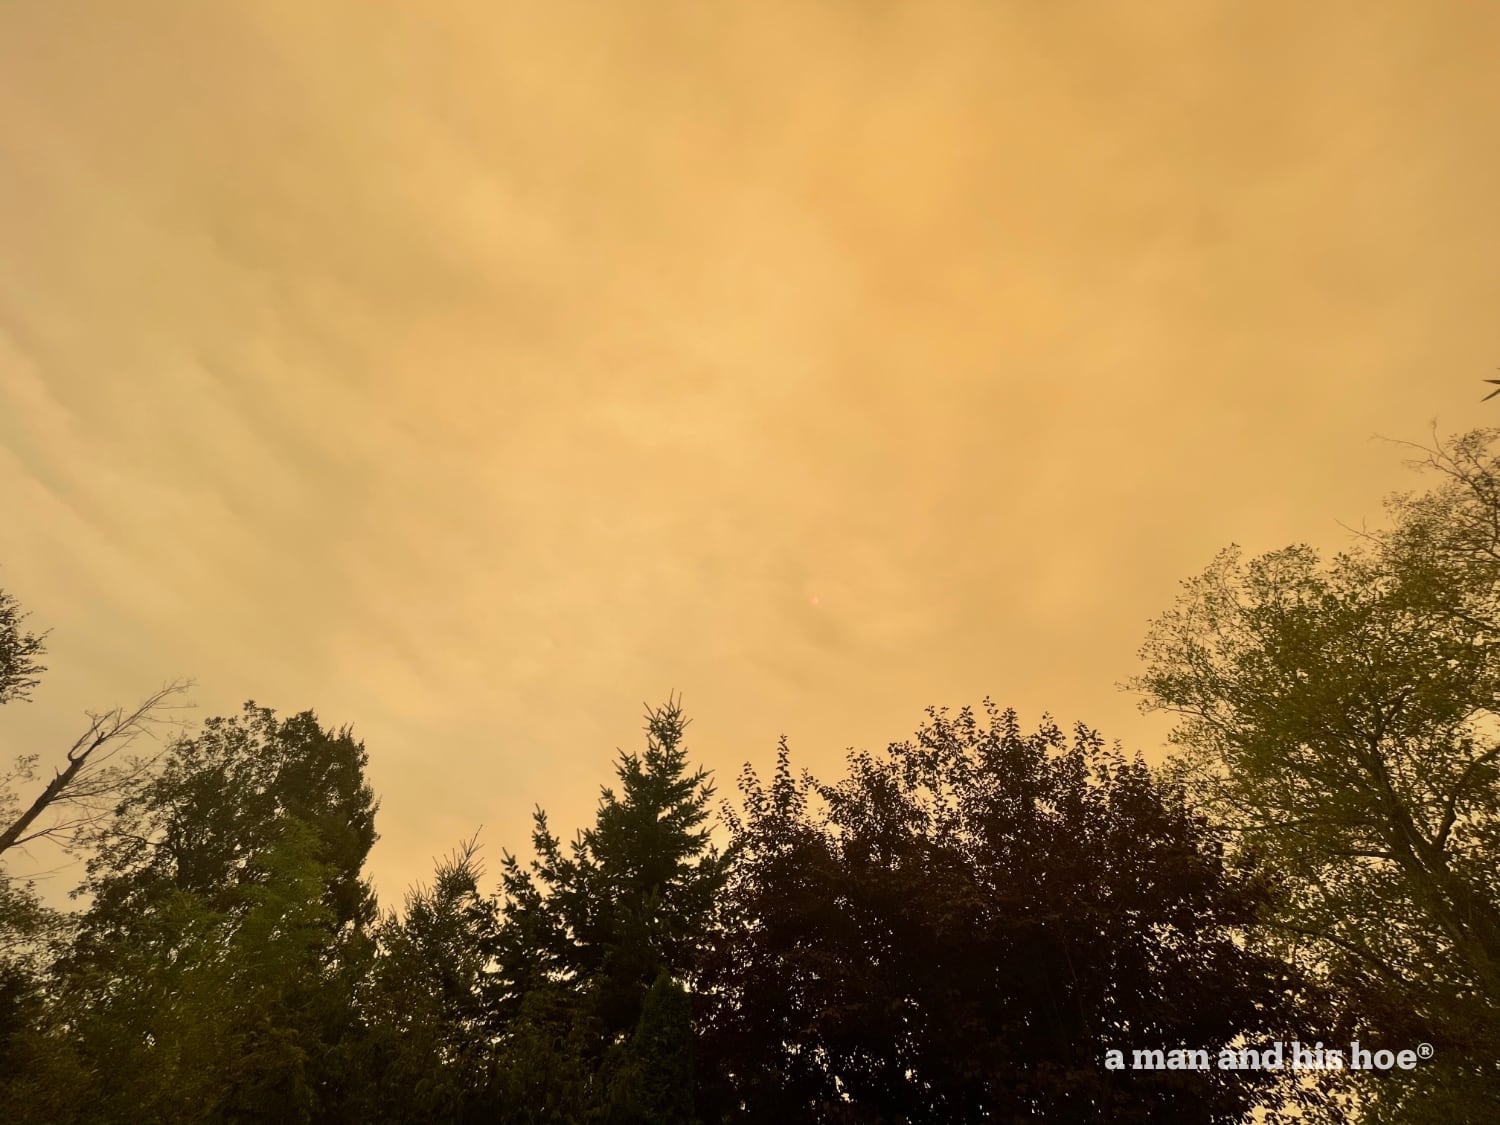 After skies, orange with smoke on September 10 make me want to cry.